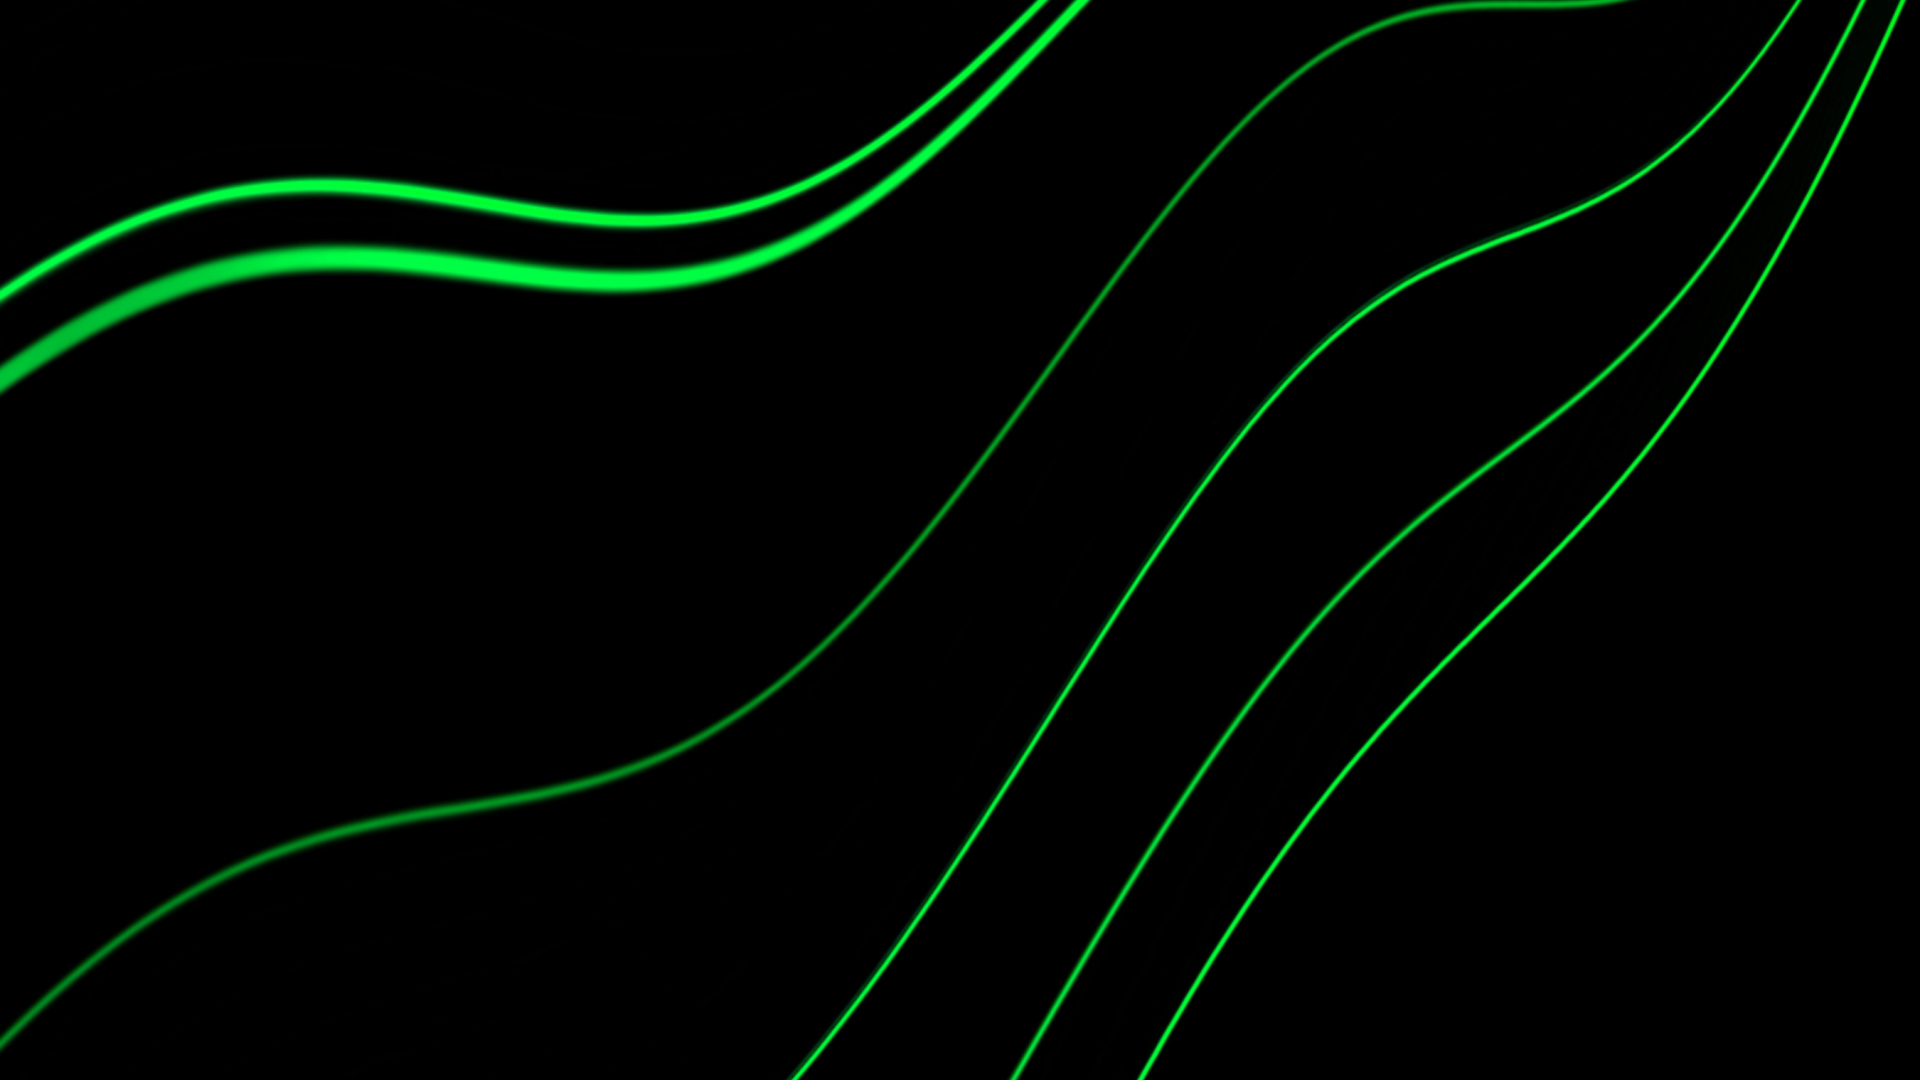 Green and White Line Illustration. Wallpaper in 1920x1080 Resolution